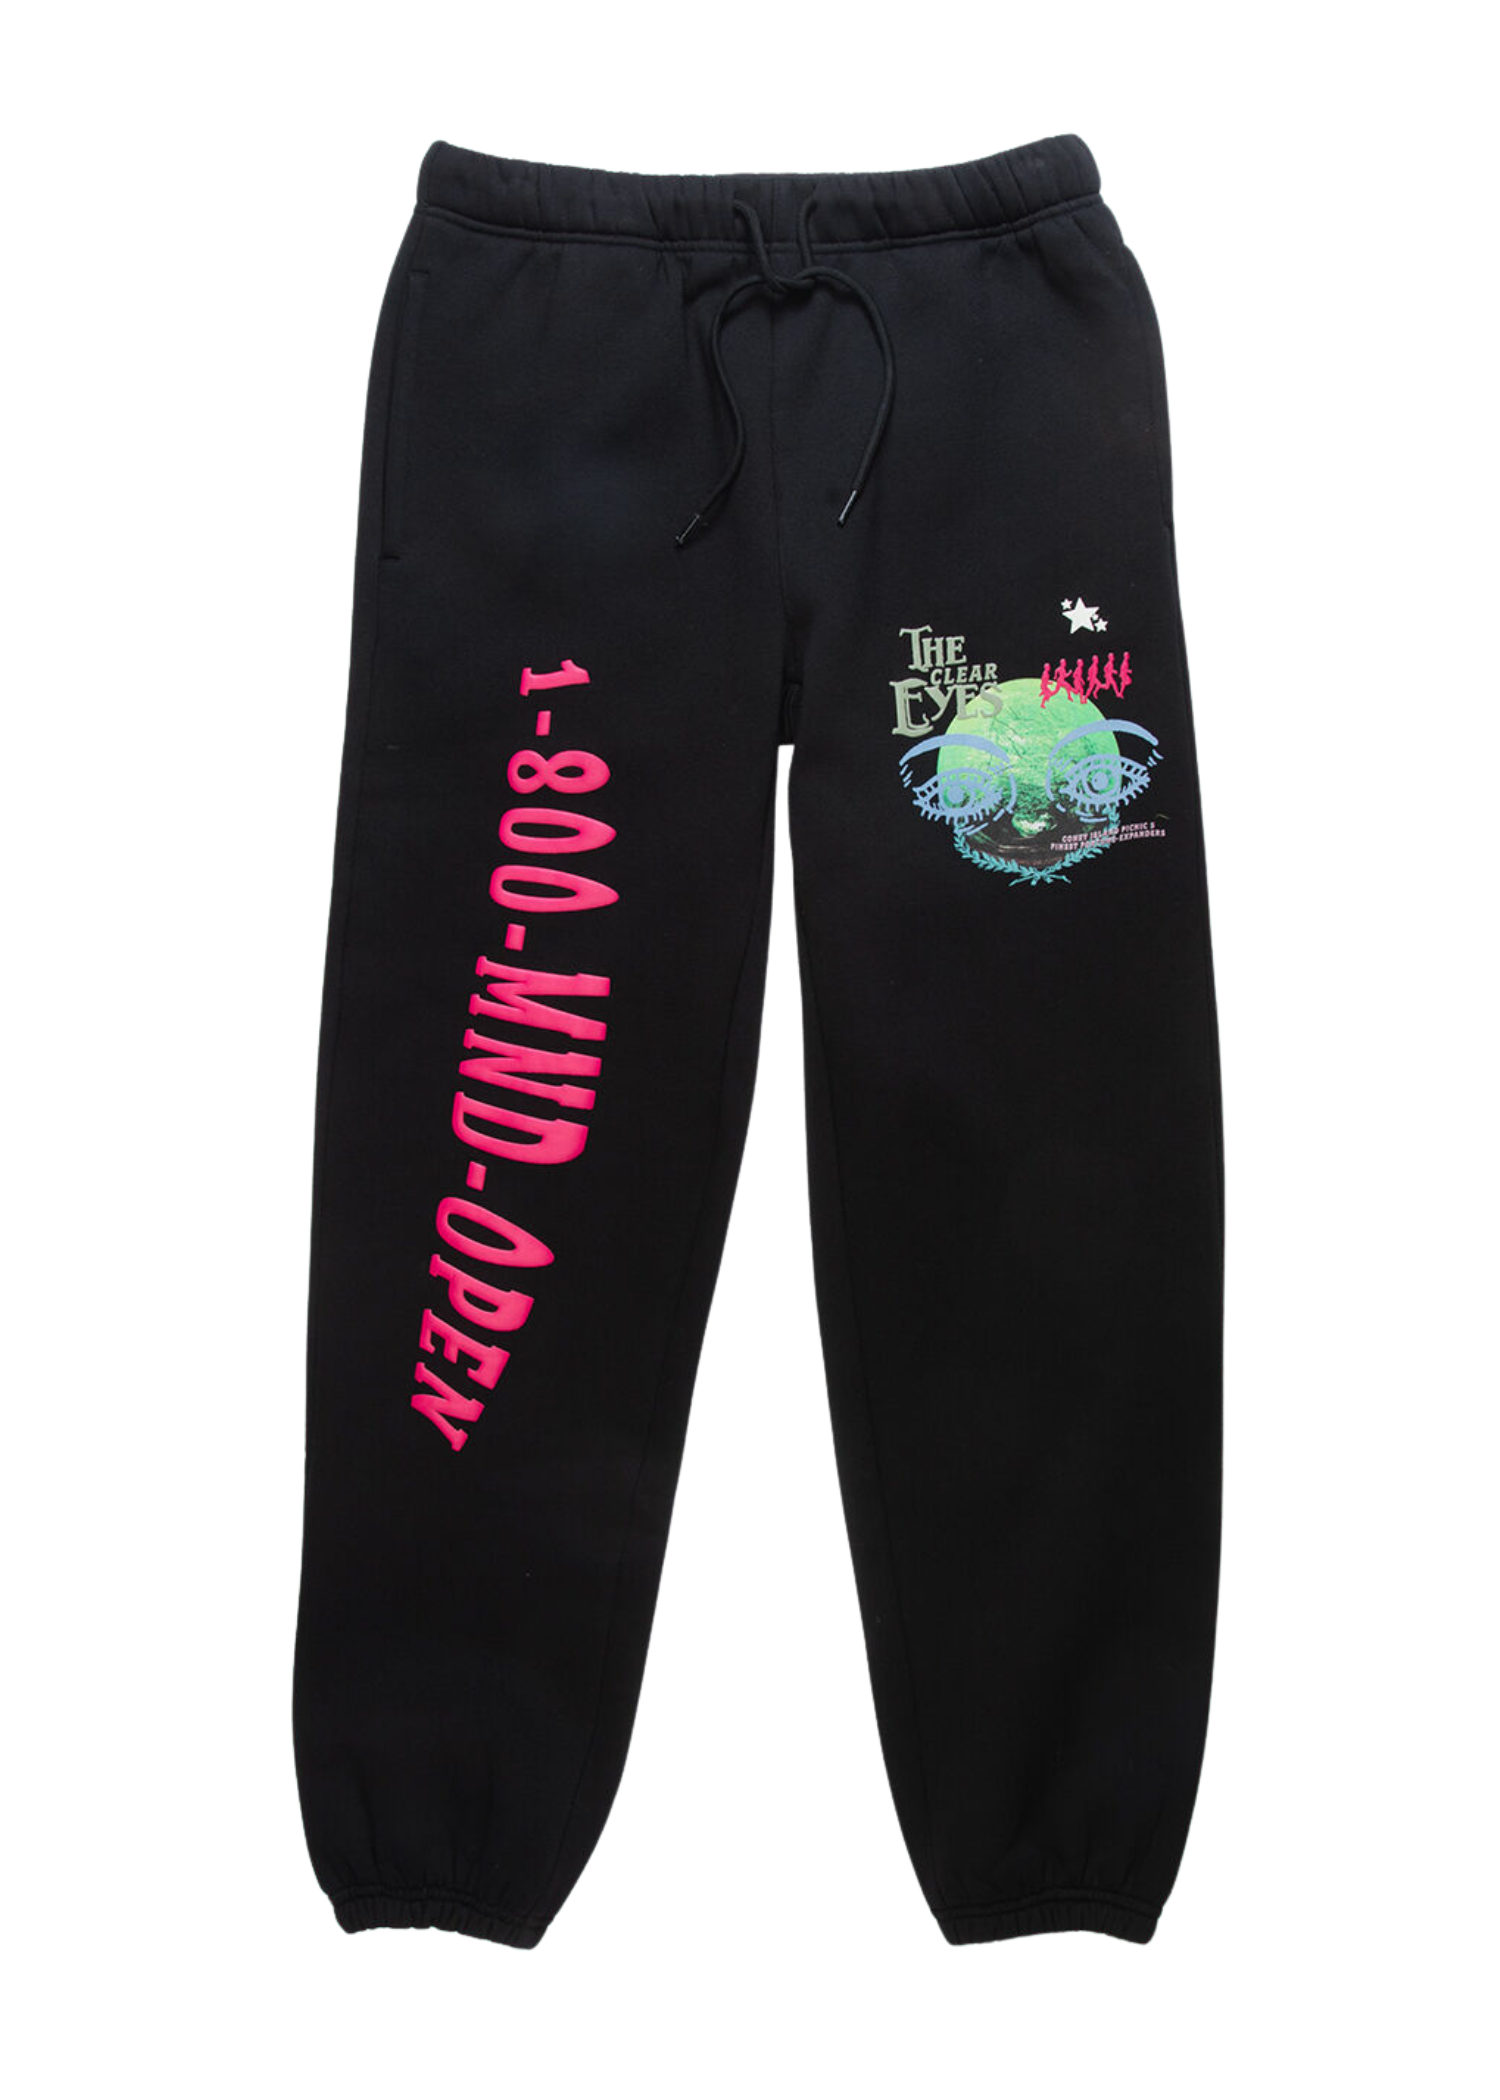 The Clear Eyes Graphic Sweatpants